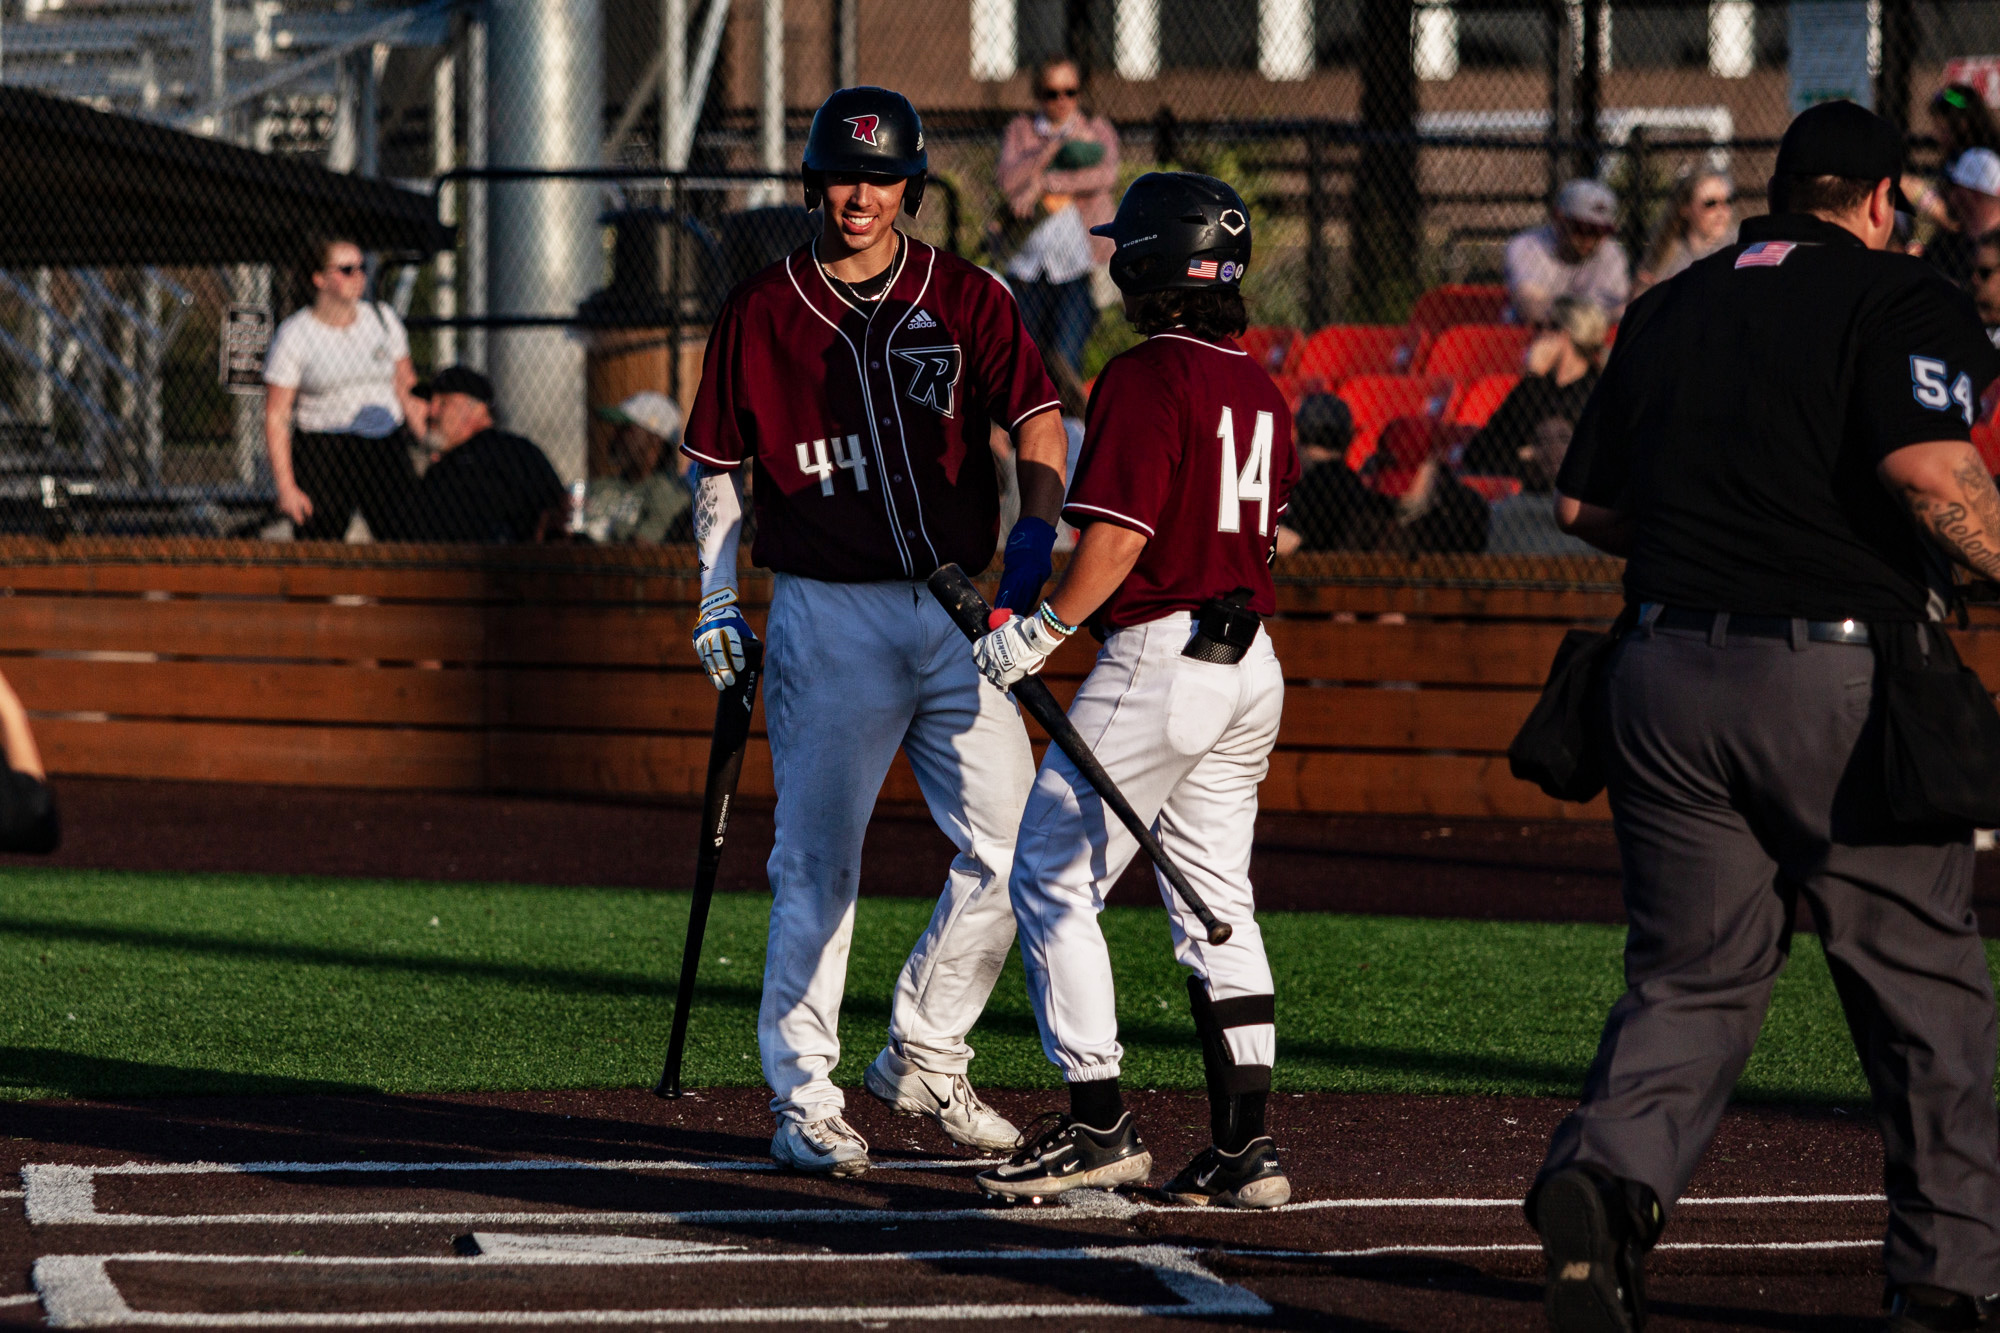 Corey Nunez and Jake Tsukada of The Ridgefield Raptors celebrate at home plate against The Bellingham Bells on Friday July 7th, 2023 at the Ridgefield Outdoor Recreation Complex.